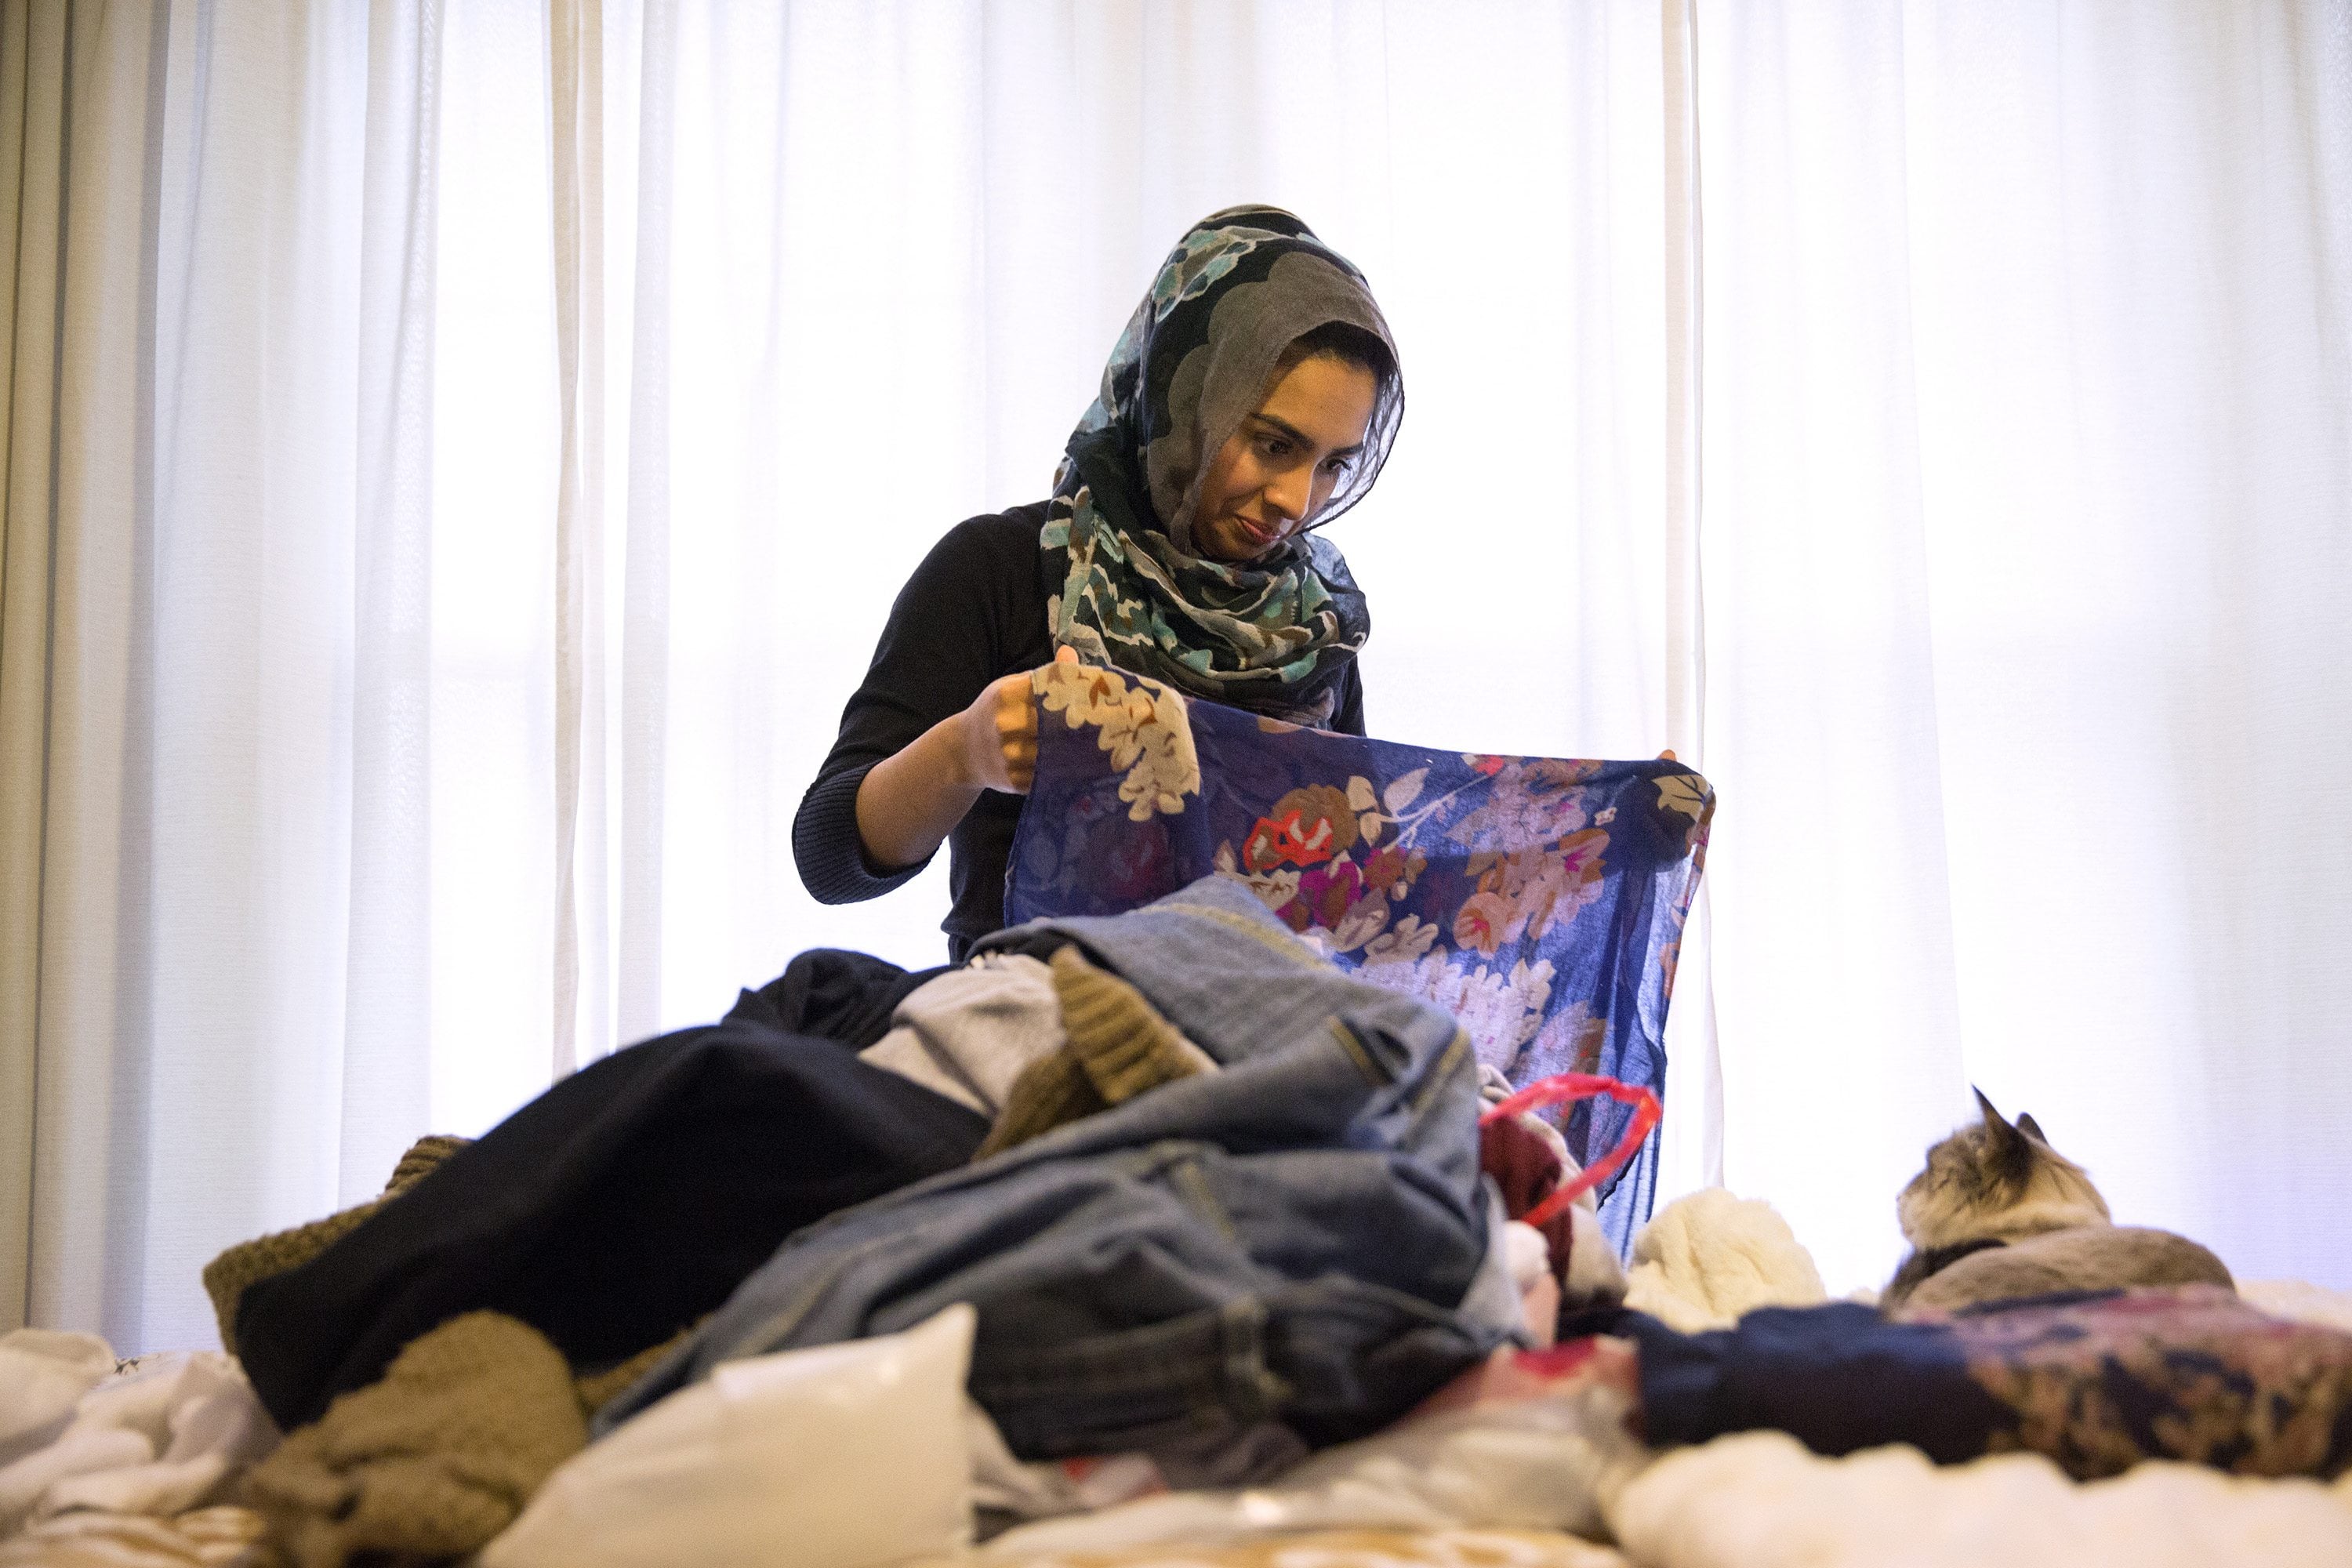 Saarah Bhaiji, 16, folds one of her many headscarves at her home Jan. 31 in Glenview, Ill. Bhaiji teaches at the Muslim Education Center in Morton Grove on Sundays and attends Glenbrook South High School as a junior during the week, where she said her experience as a Muslim has been mostly positive.